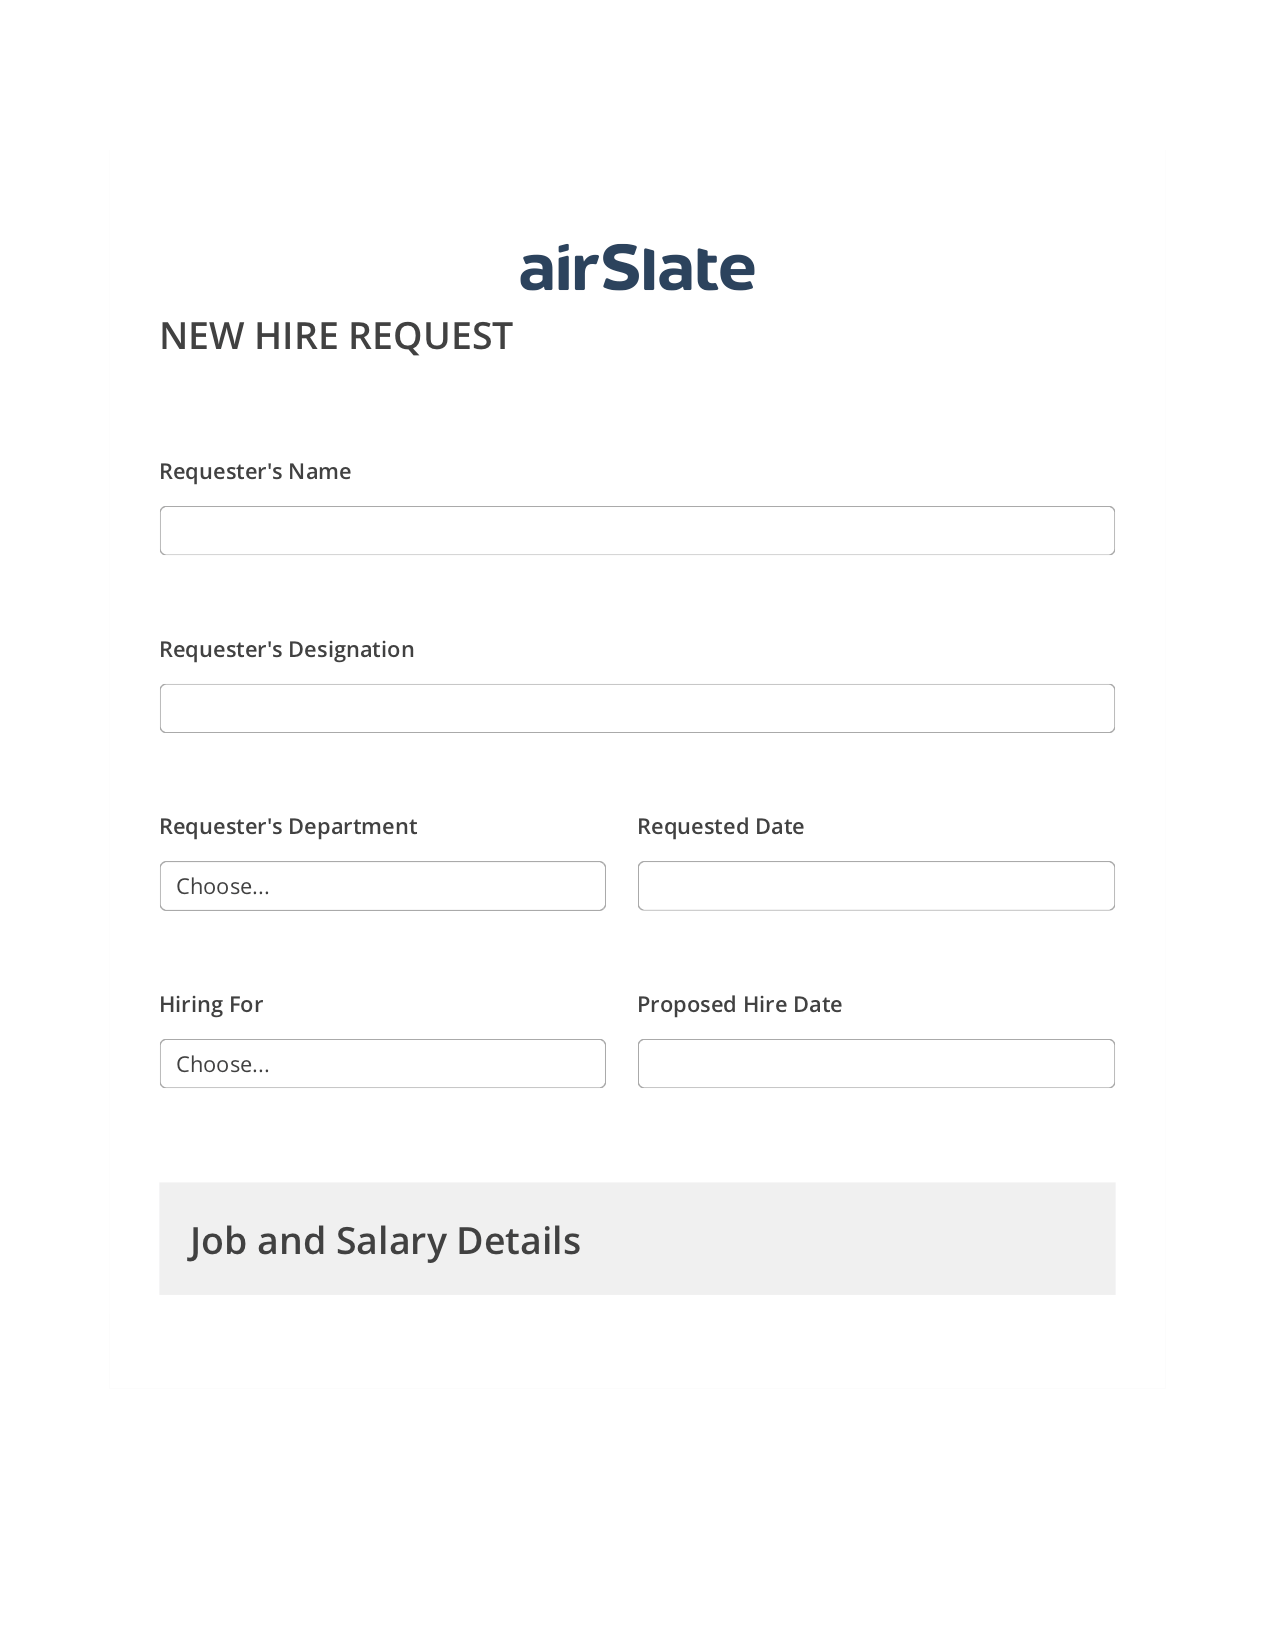 Multirole Hiring Request Workflow Pre-fill from Salesforce Records Bot, Assign Roles to Recipients Bot, Export to Excel 365 Bot